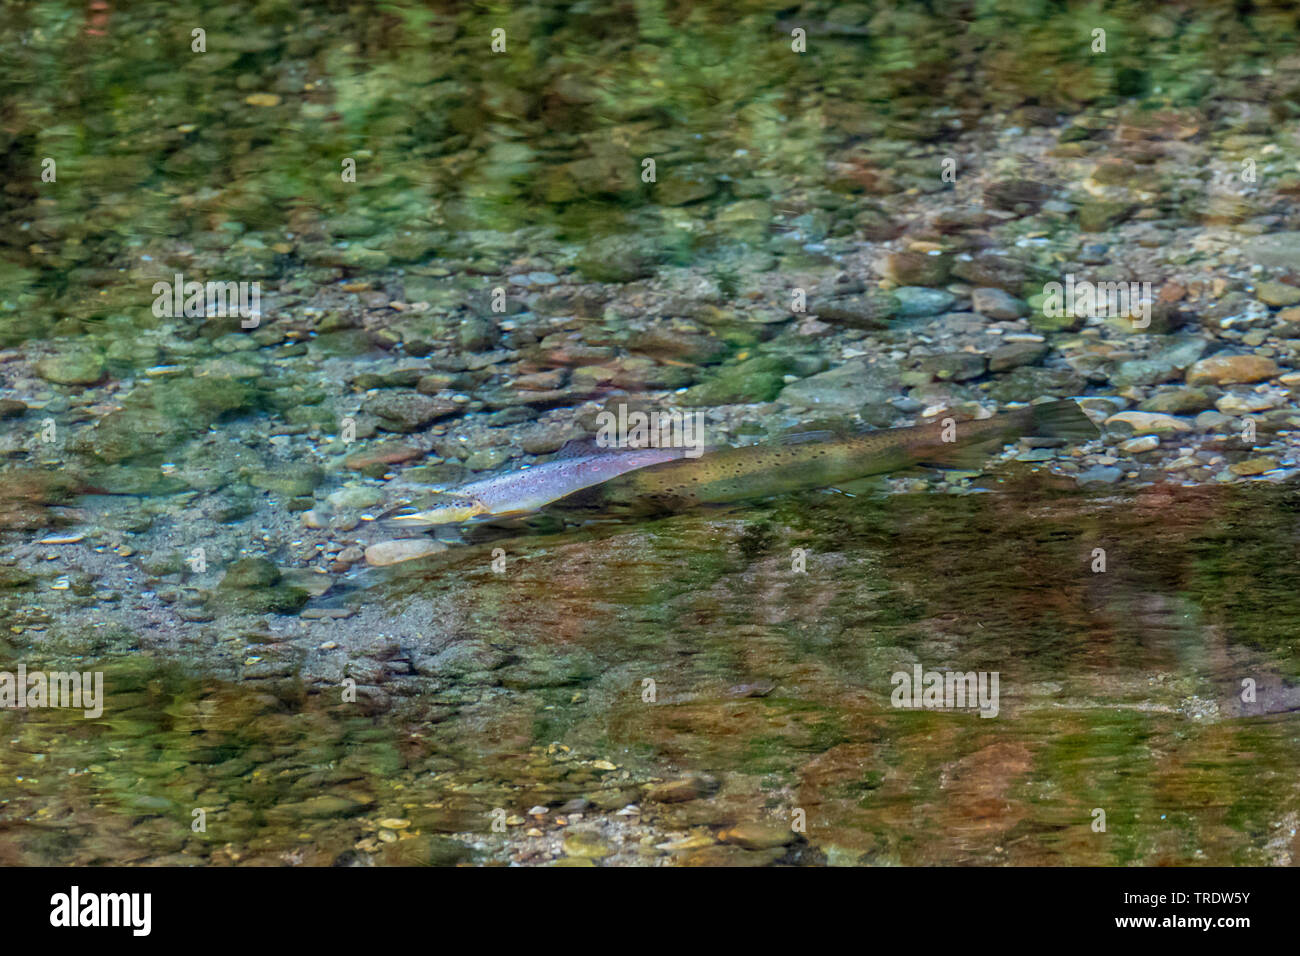 brown trout, river trout, brook trout (Salmo trutta fario), spawning, pair over the breeding ground in a river, Germany, Bavaria, Prien Stock Photo